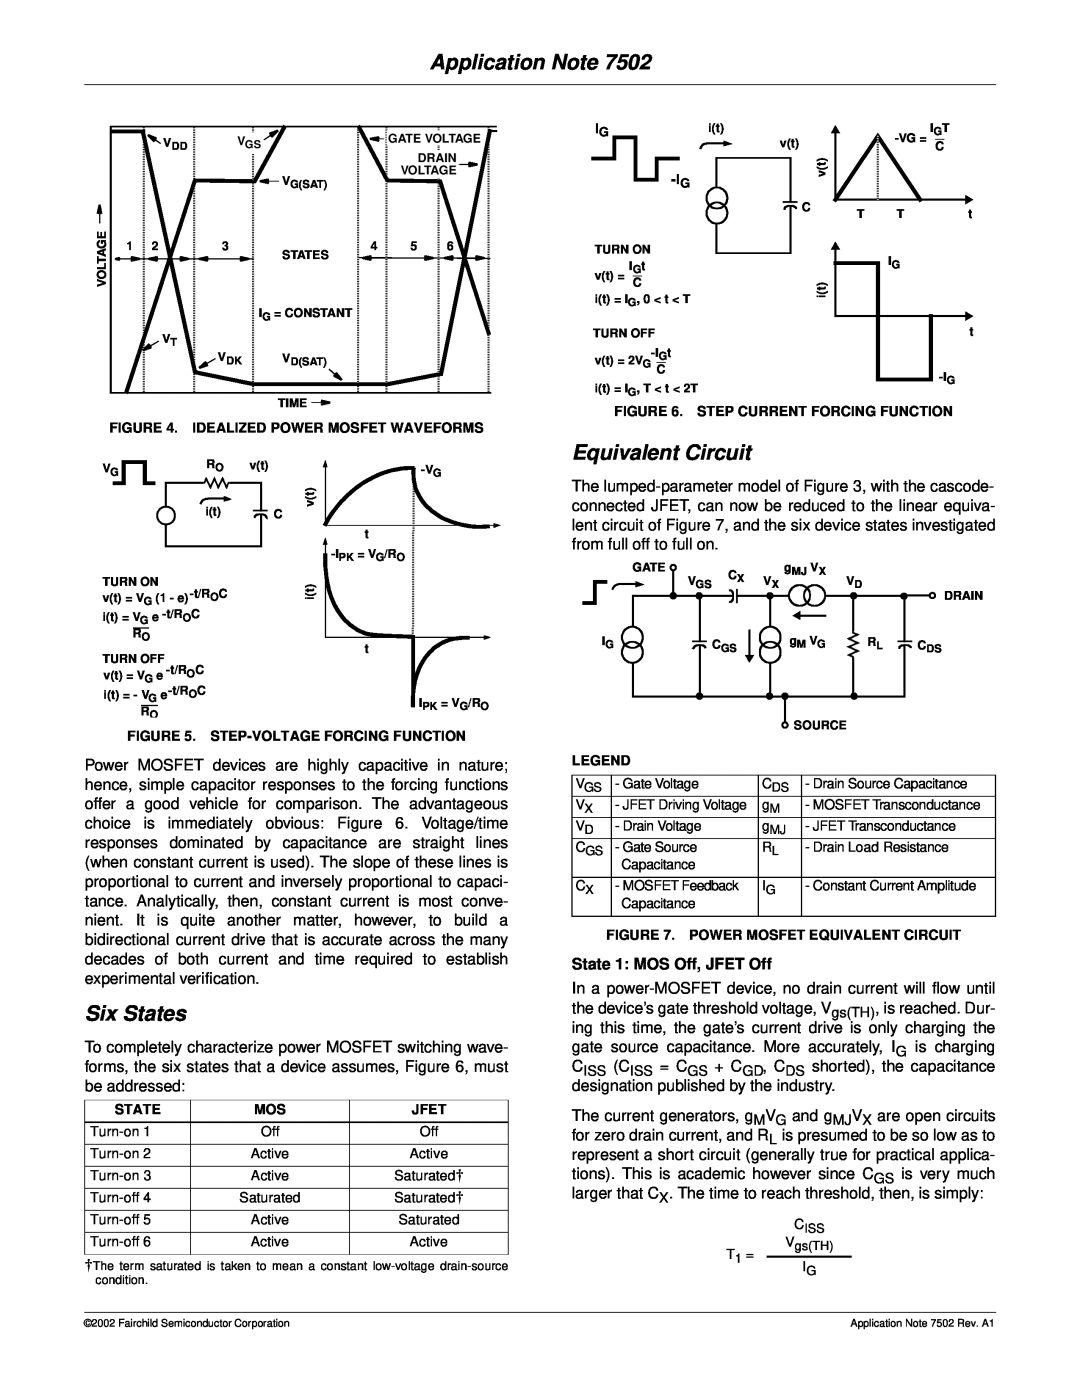 Fairchild AN-7502 manual Application Note, Equivalent Circuit, Six States, State 1 MOS Off, JFET Off 